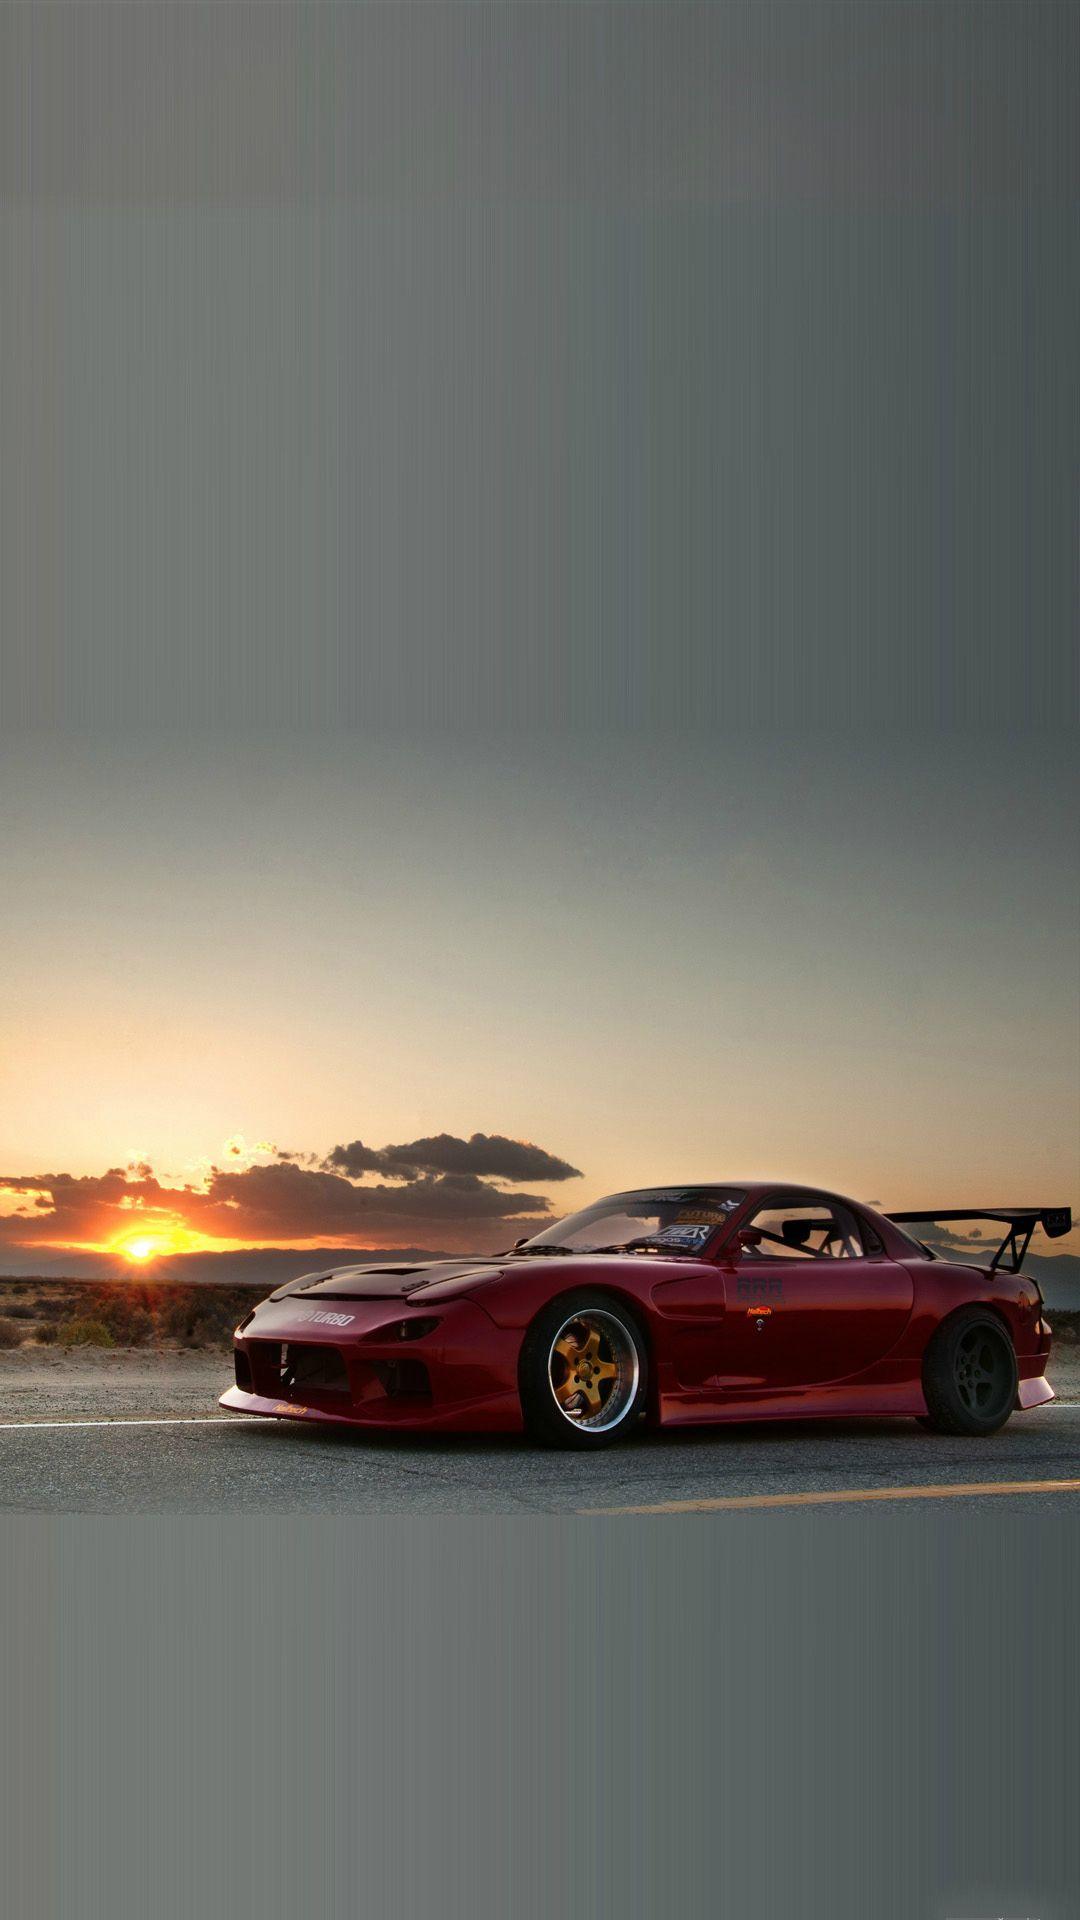 Rx7 Iphone Wallpapers Top Free Rx7 Iphone Backgrounds